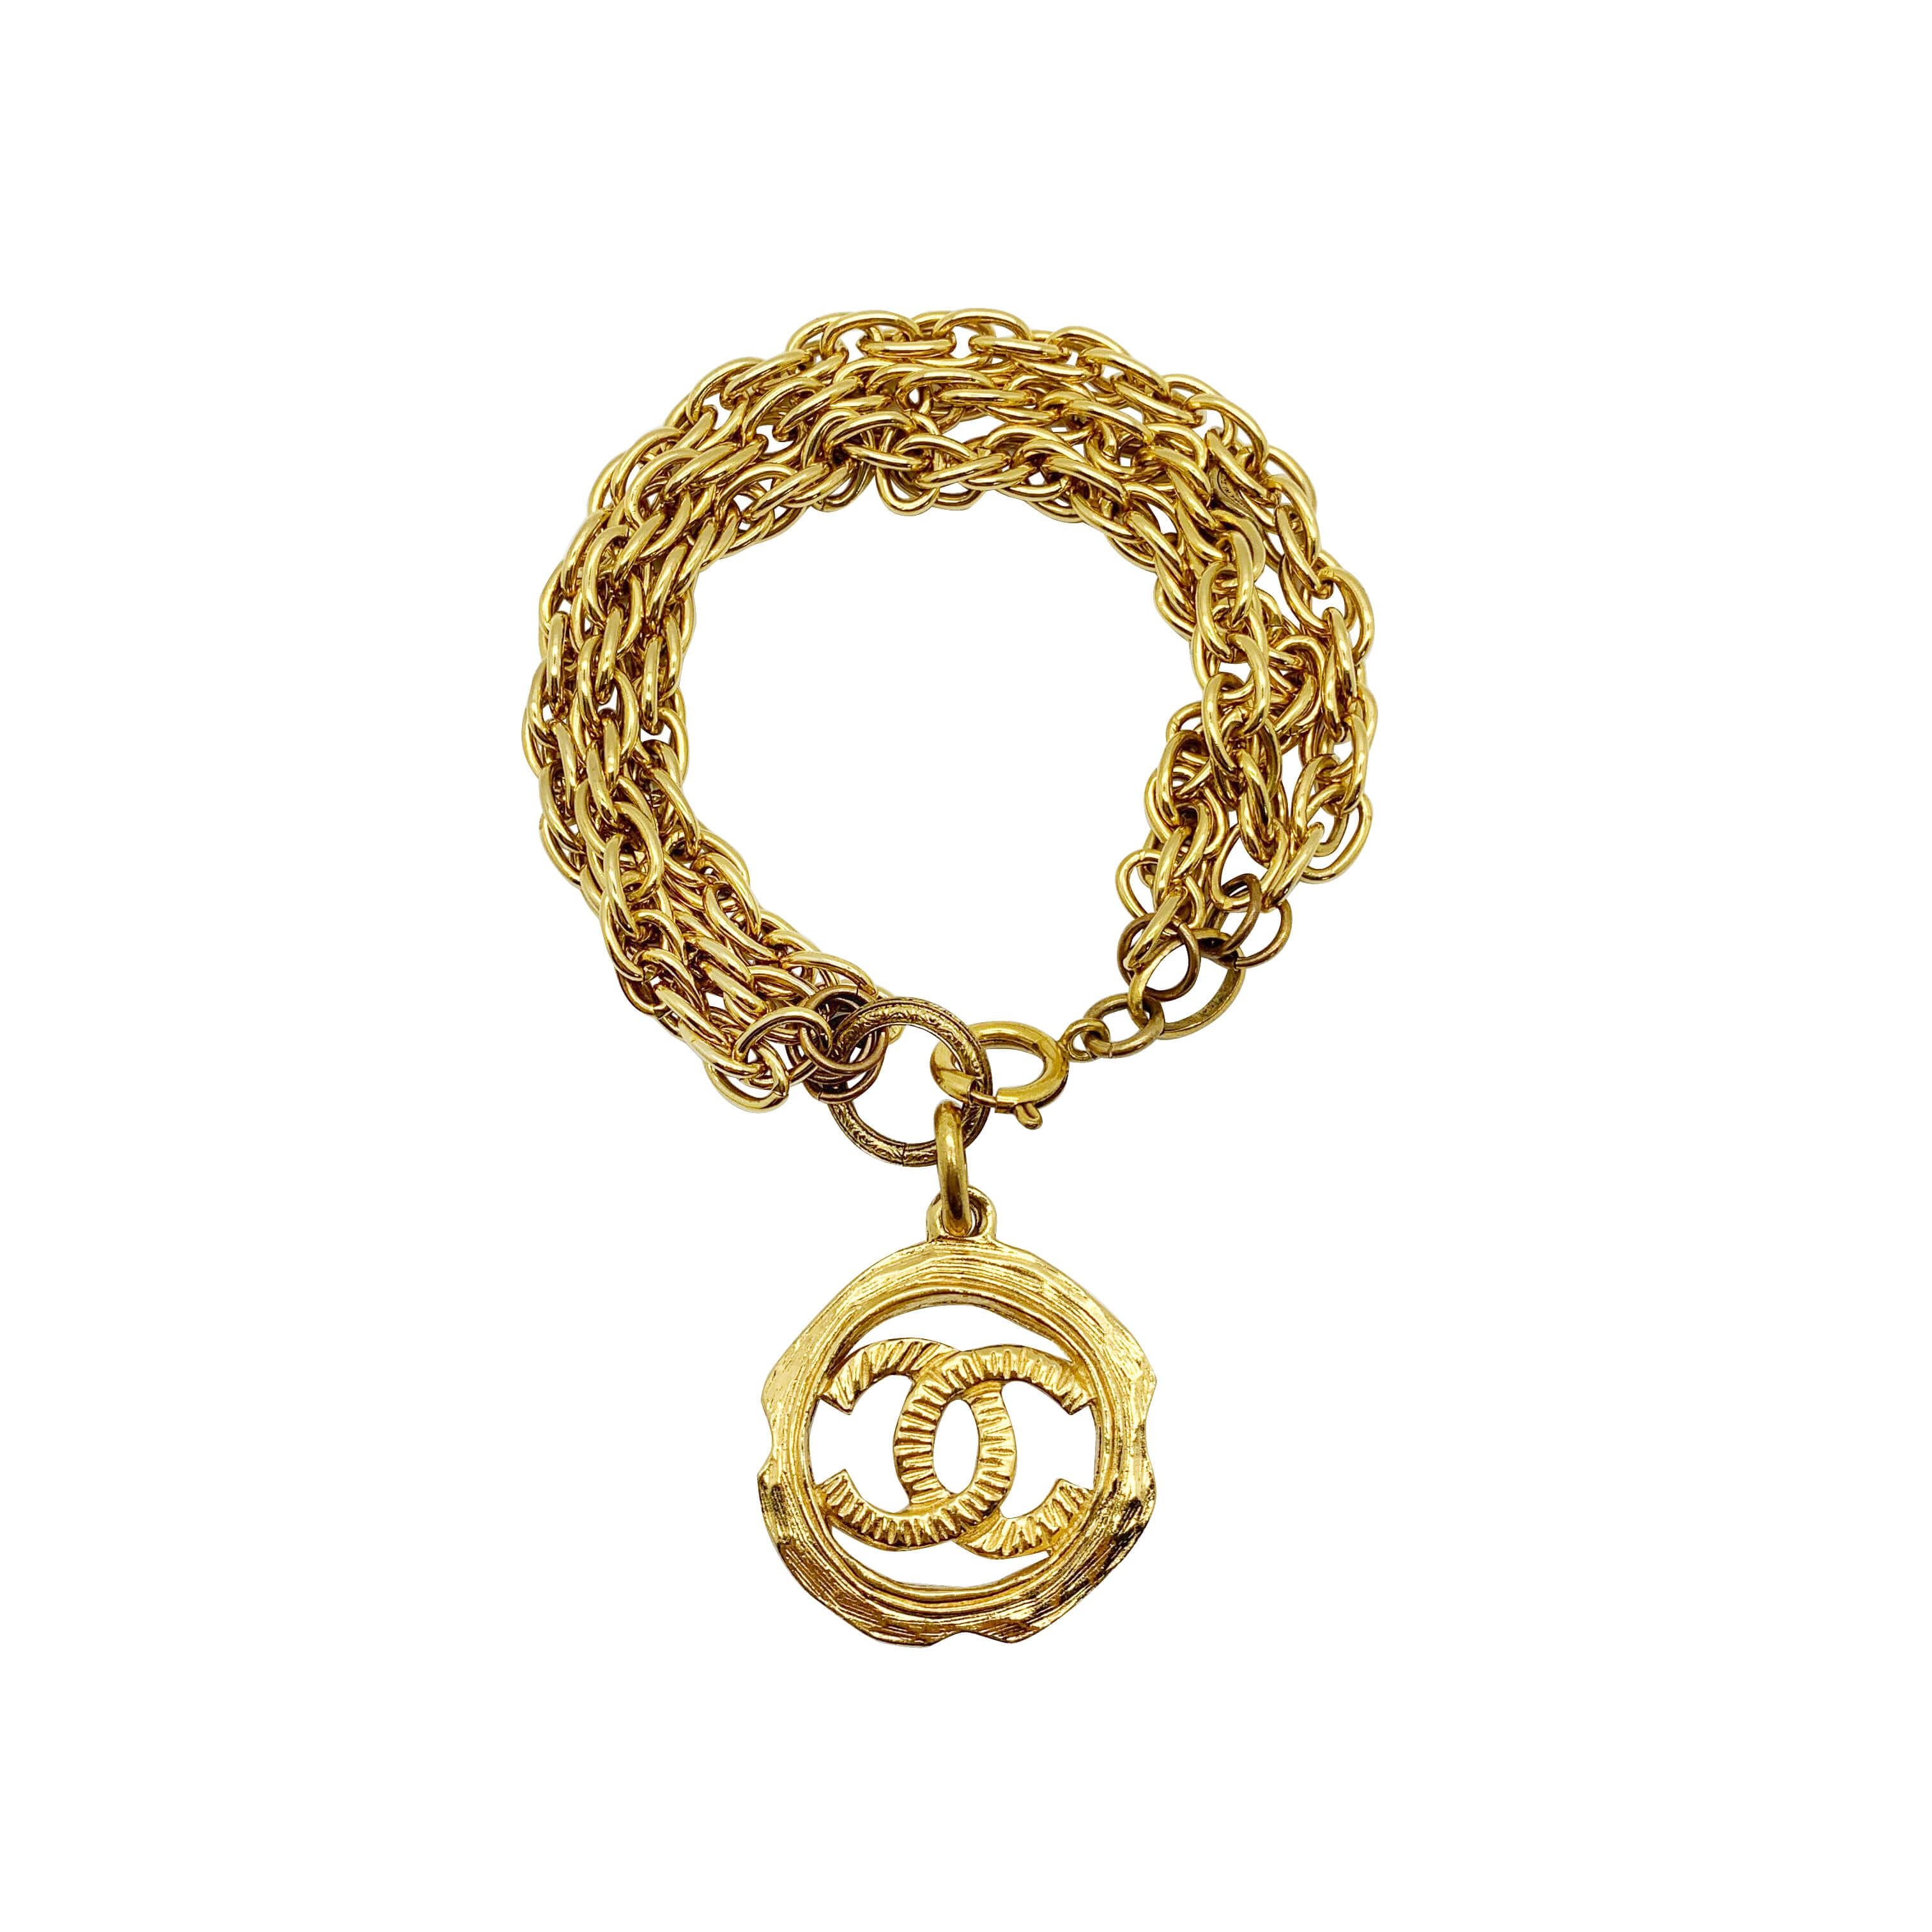 Vintage Chanel Chain Logo Charm Bracelet by Karl Lagerfeld 1980s In Good Condition For Sale In Wilmslow, GB